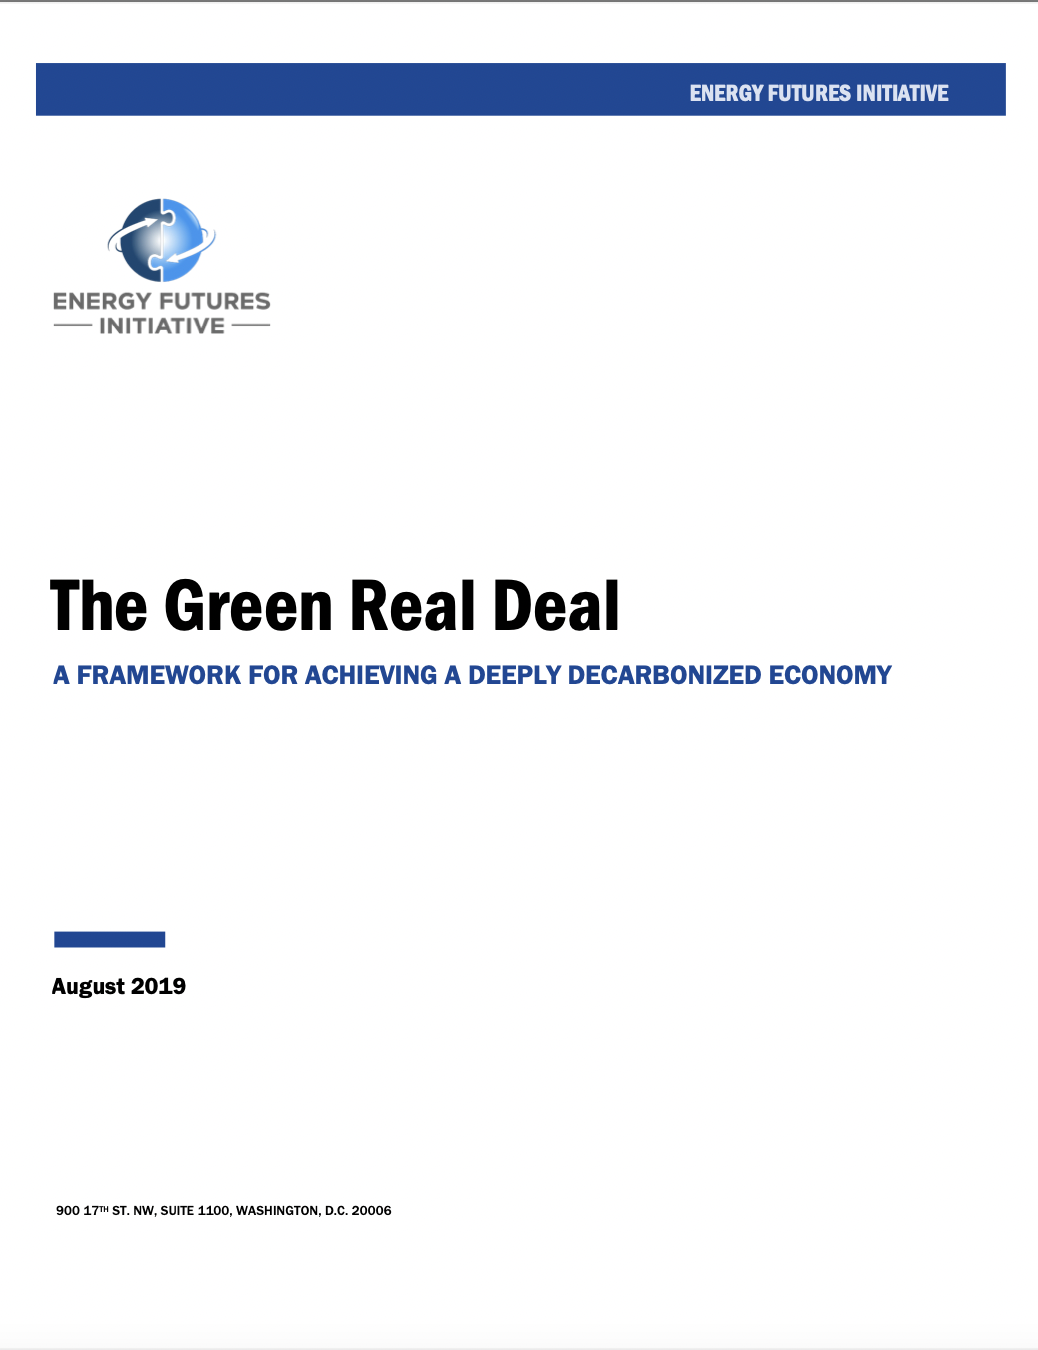 Cover of The Green Real Deal report.